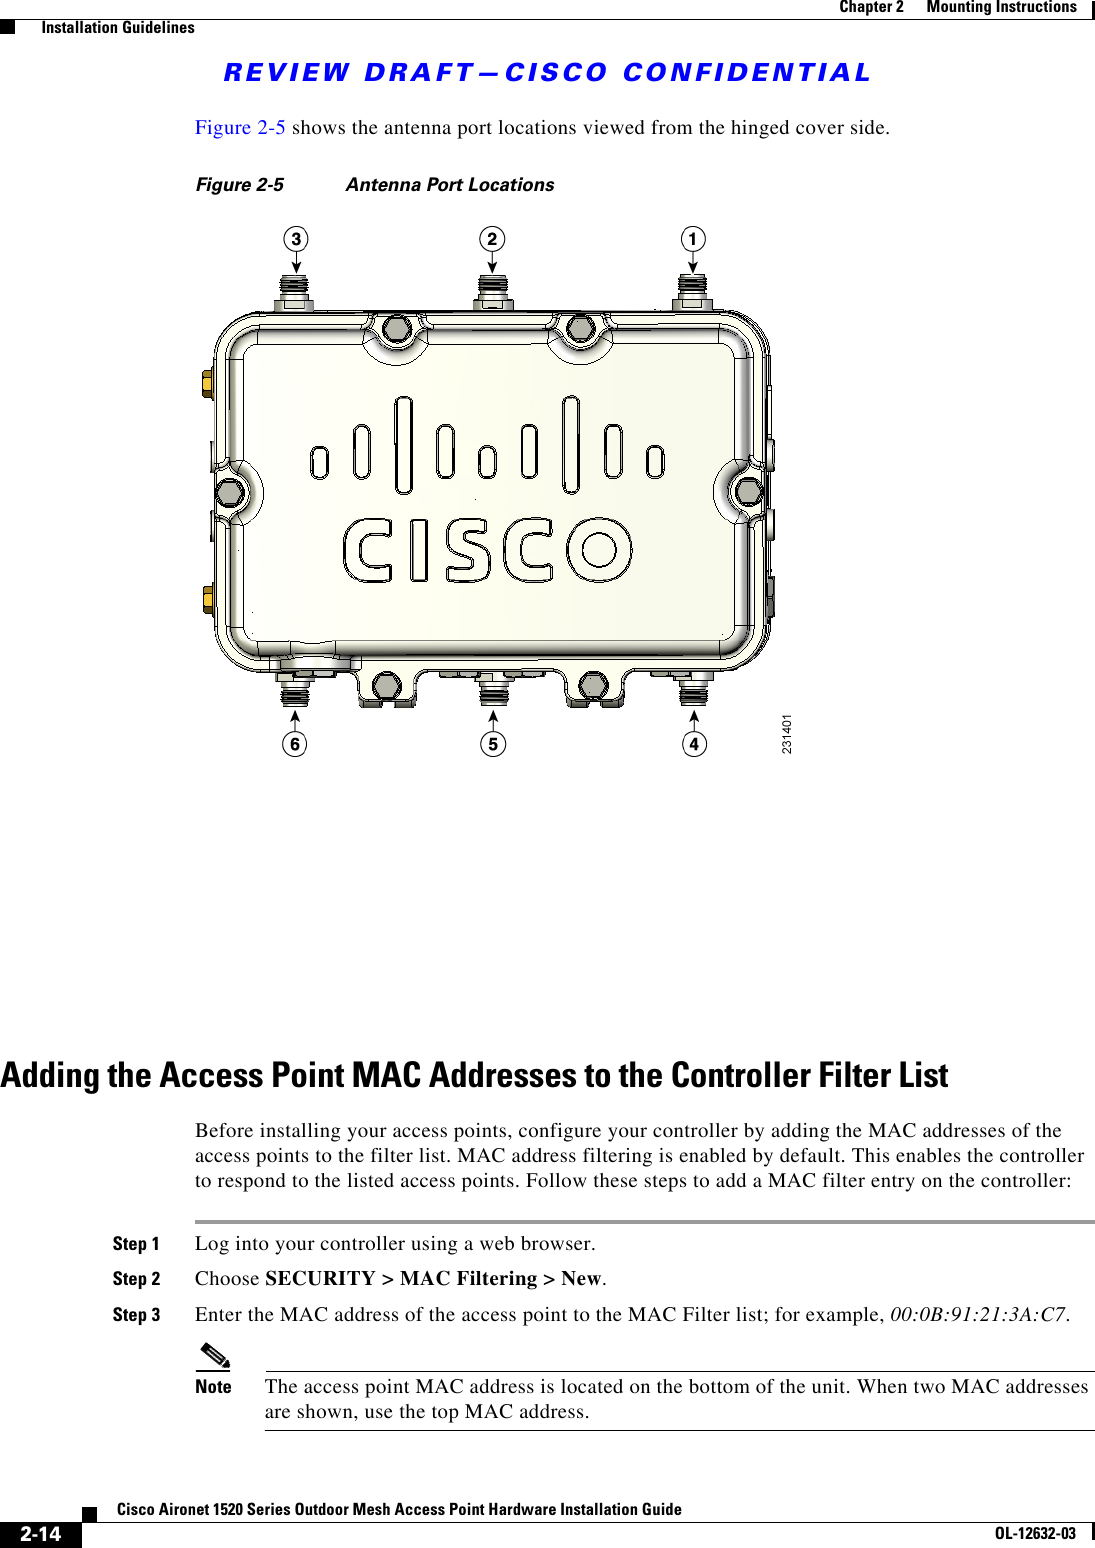 REVIEW DRAFT—CISCO CONFIDENTIAL2-14Cisco Aironet 1520 Series Outdoor Mesh Access Point Hardware Installation GuideOL-12632-03Chapter 2      Mounting Instructions  Installation GuidelinesFigure 2-5 shows the antenna port locations viewed from the hinged cover side.Figure 2-5 Antenna Port LocationsAdding the Access Point MAC Addresses to the Controller Filter ListBefore installing your access points, configure your controller by adding the MAC addresses of the access points to the filter list. MAC address filtering is enabled by default. This enables the controller to respond to the listed access points. Follow these steps to add a MAC filter entry on the controller:Step 1 Log into your controller using a web browser.Step 2 Choose SECURITY &gt; MAC Filtering &gt; New.Step 3 Enter the MAC address of the access point to the MAC Filter list; for example, 00:0B:91:21:3A:C7.Note The access point MAC address is located on the bottom of the unit. When two MAC addresses are shown, use the top MAC address.